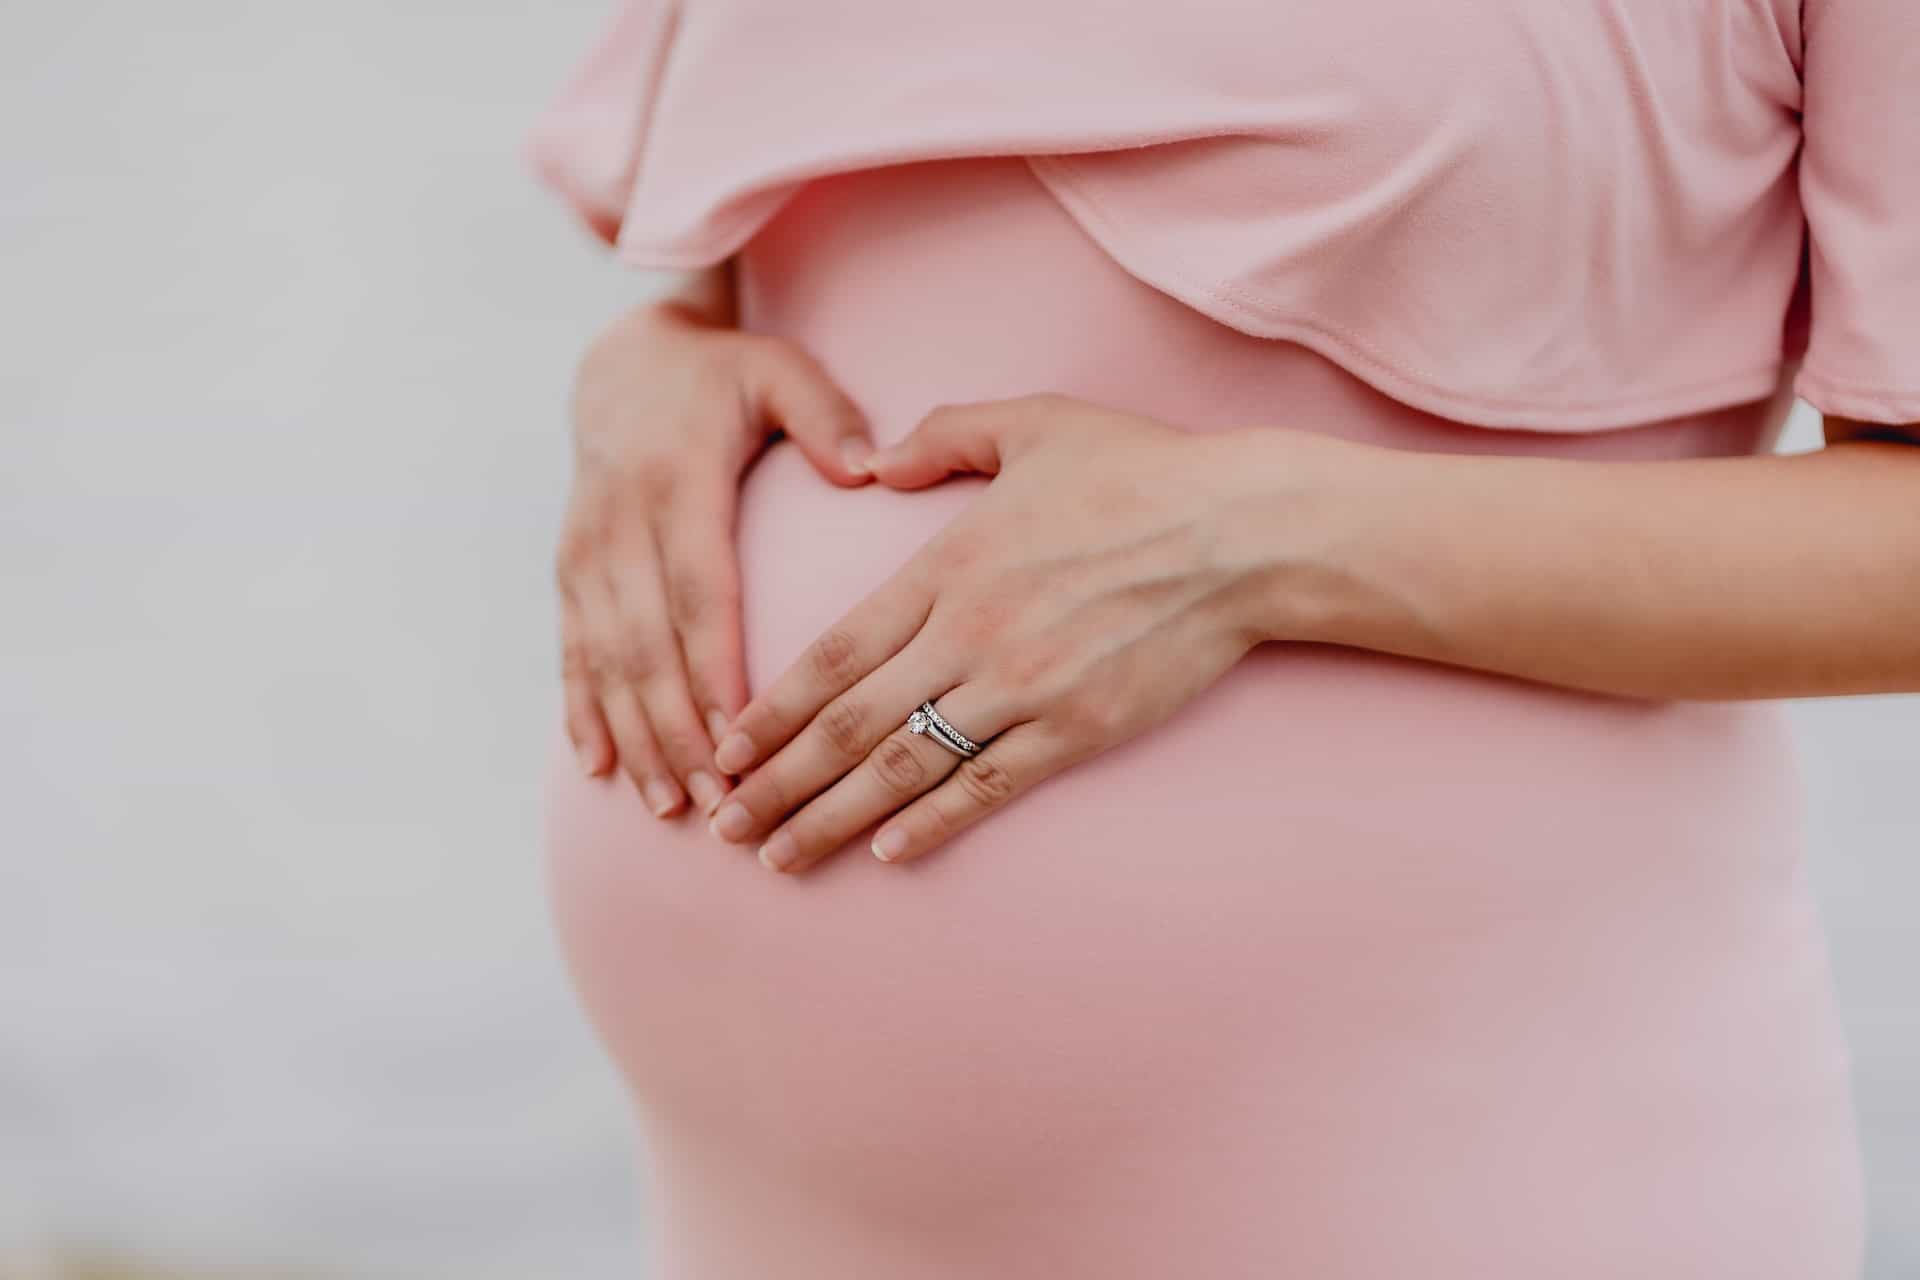 Spotting during pregnancy – is it a cause for concern?